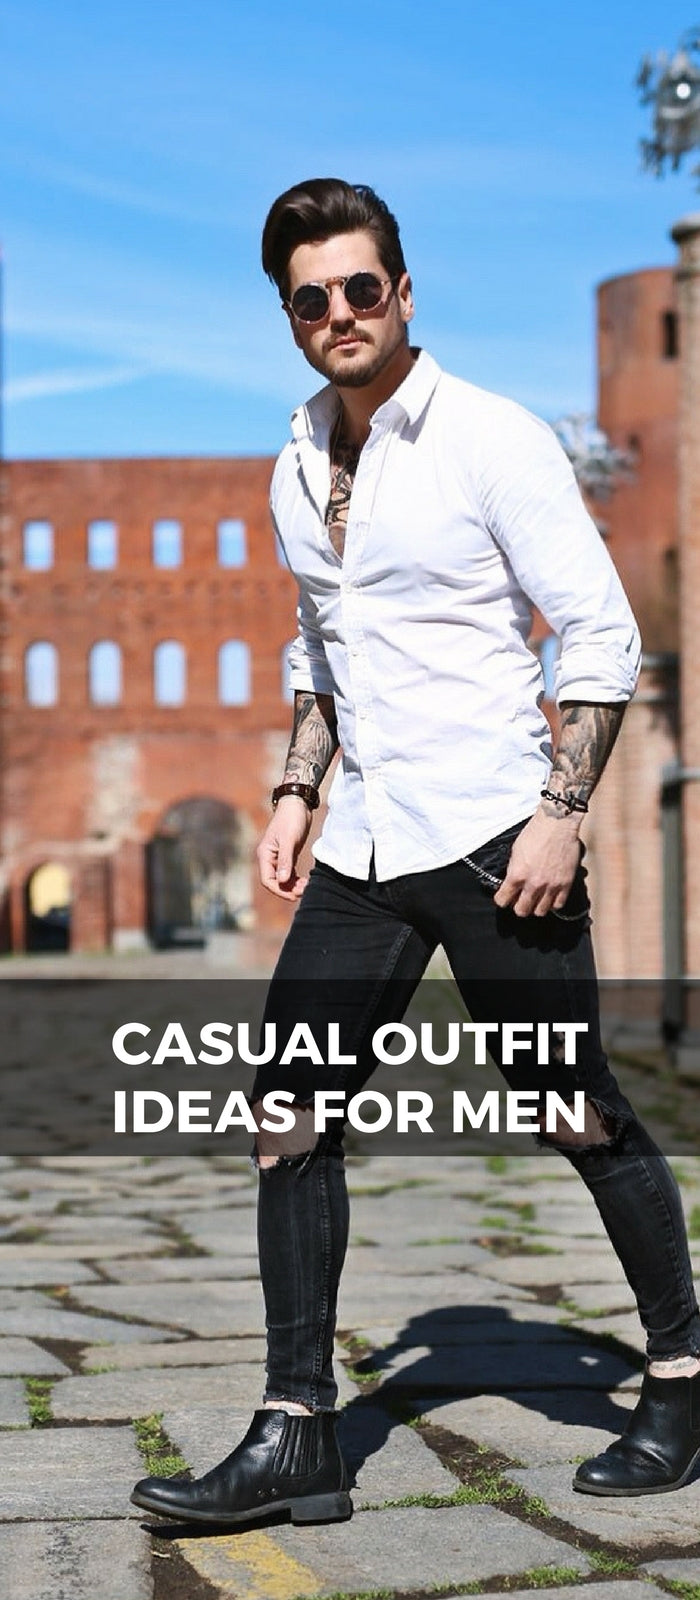 12 Casual Outfit ideas For Men – LIFESTYLE BY PS